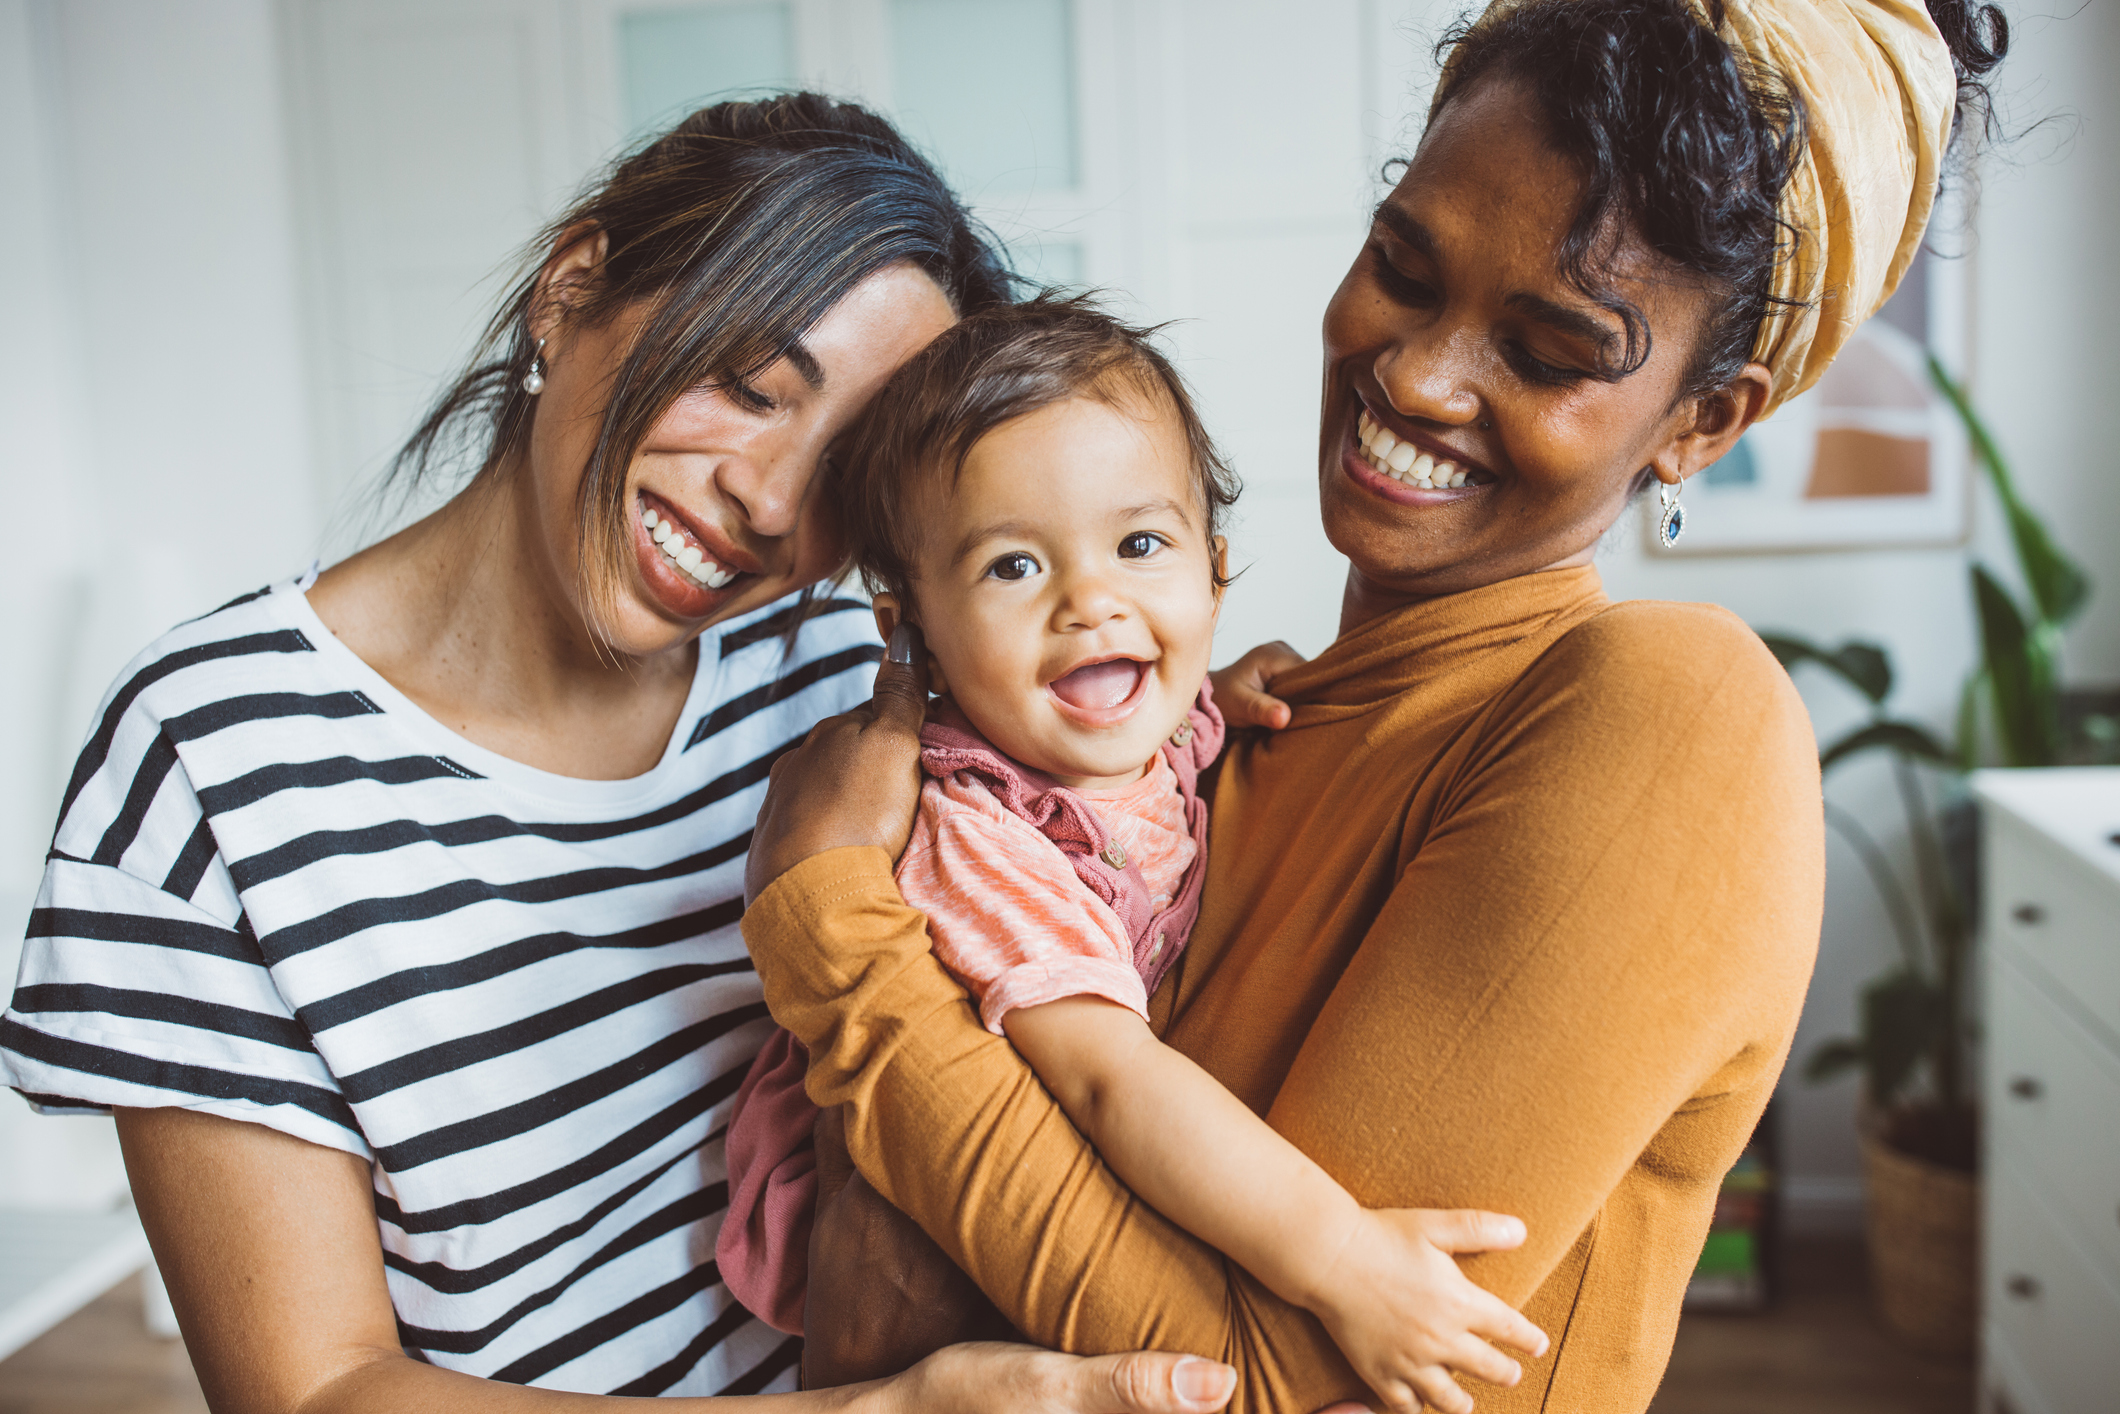 Two smiling black or multiracial women holding a happy baby while all embrace